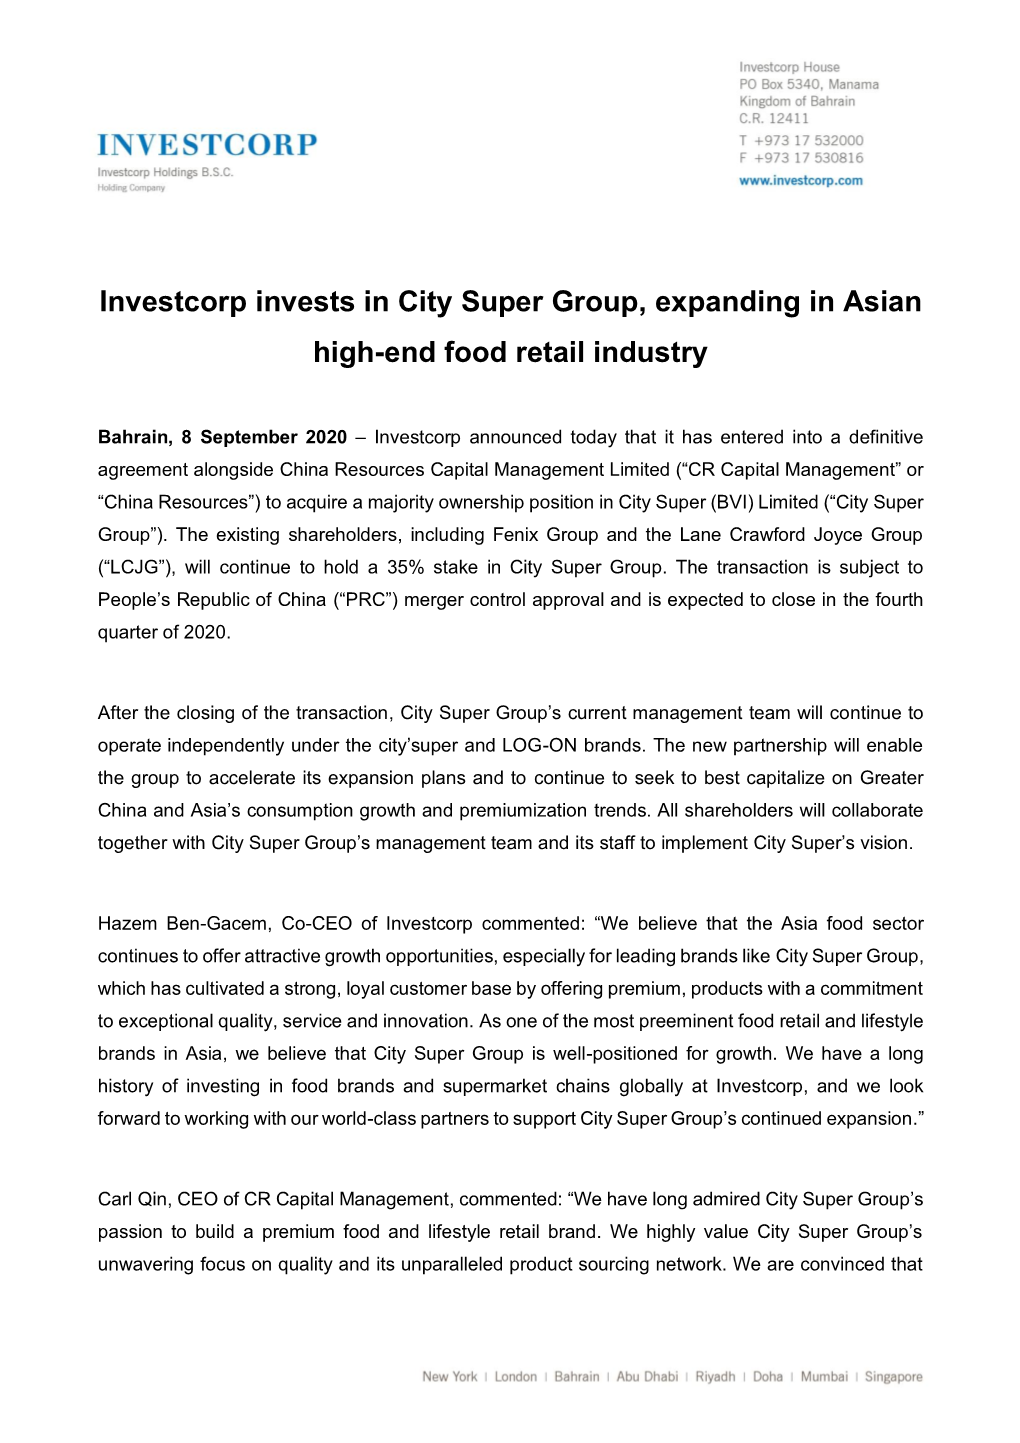 Investcorp Invests in City Super Group, Expanding in Asian High-End Food Retail Industry